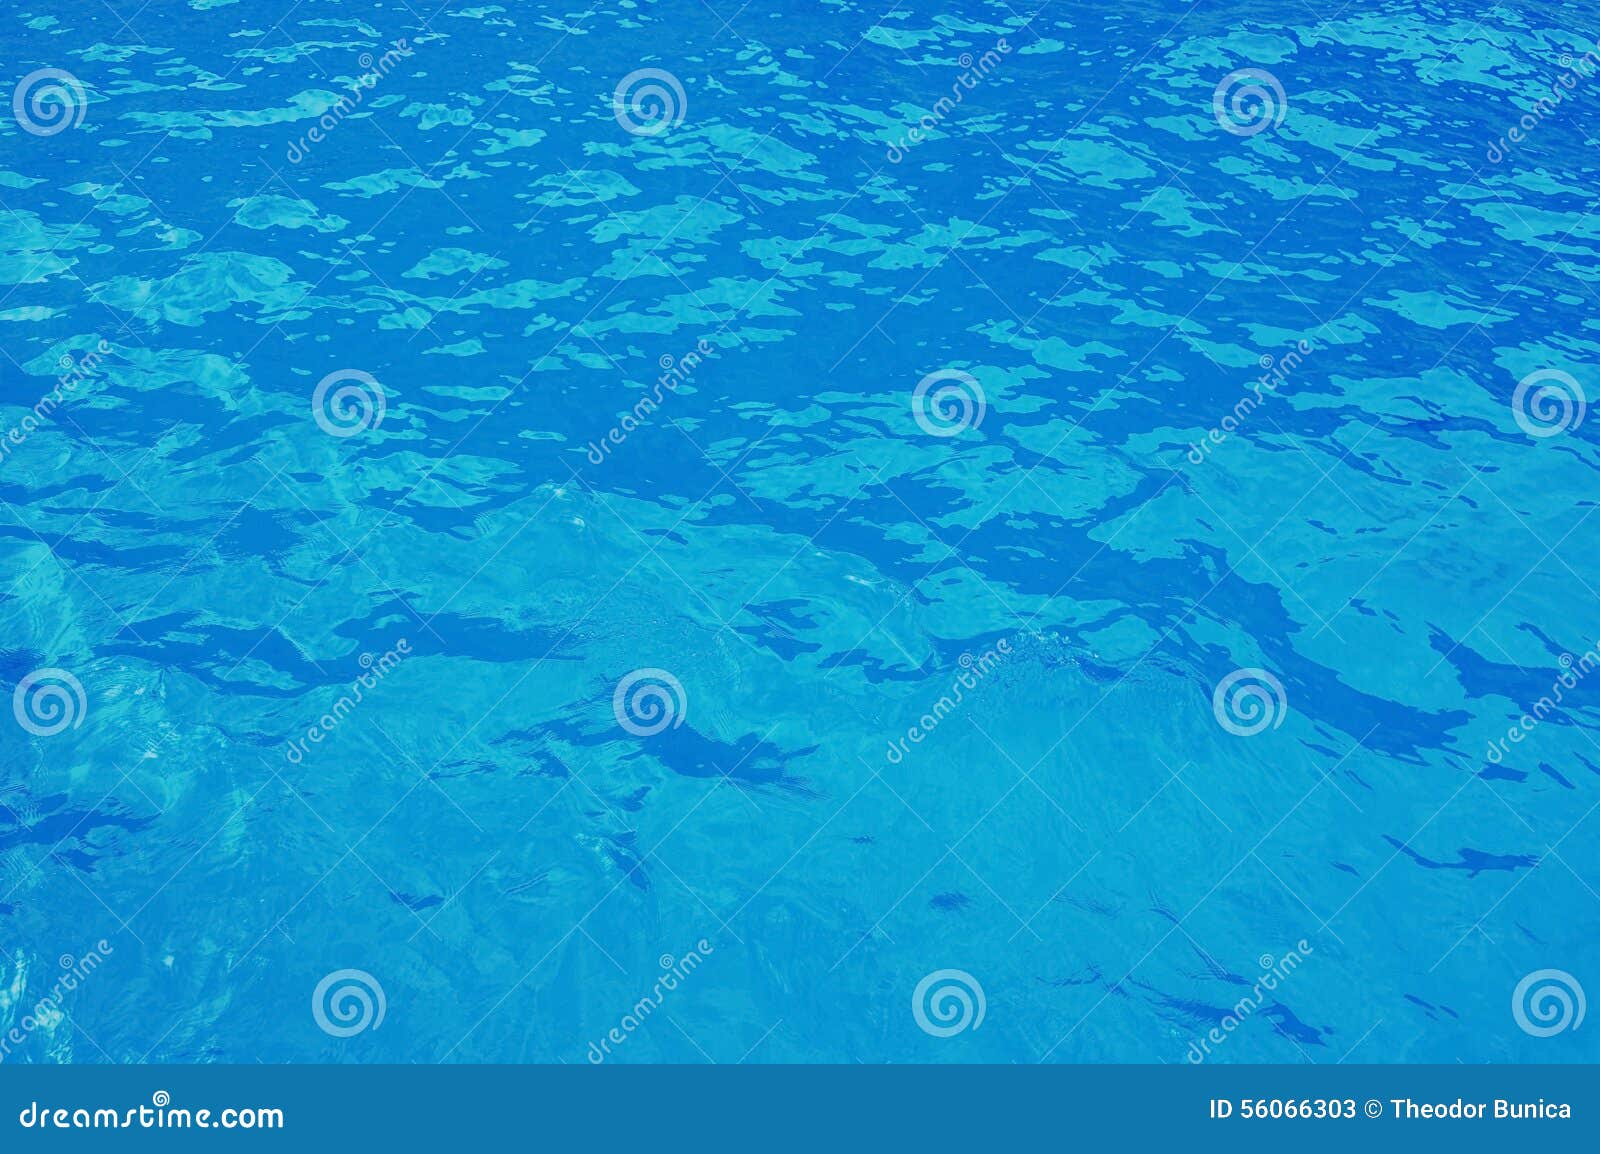 background of blue water. ionian sea. seascape